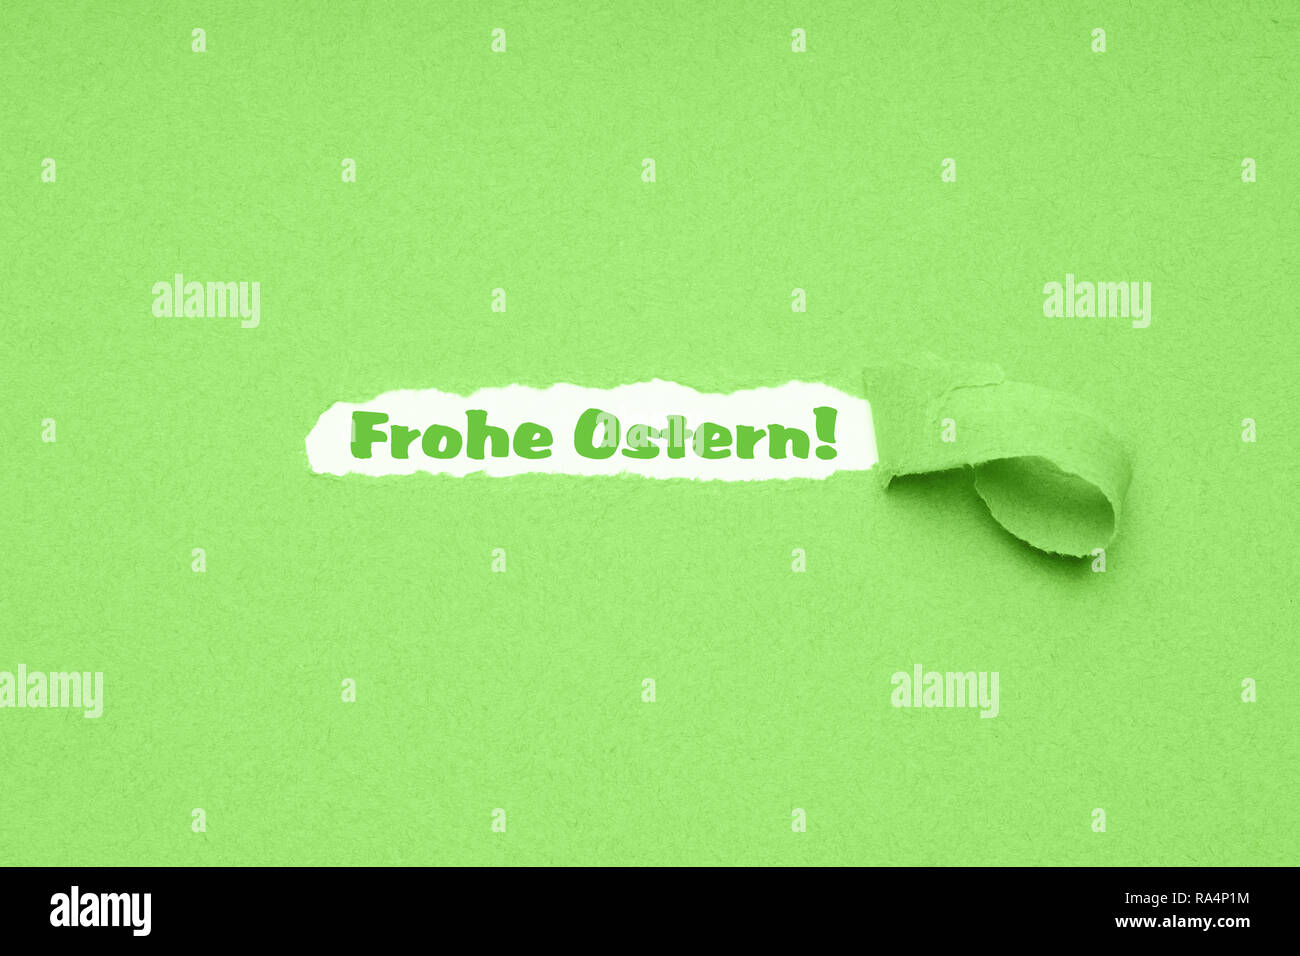 Frohe Ostern is German for Happy Easter - hole torn in green paper background to reveal easter greeting Stock Photo